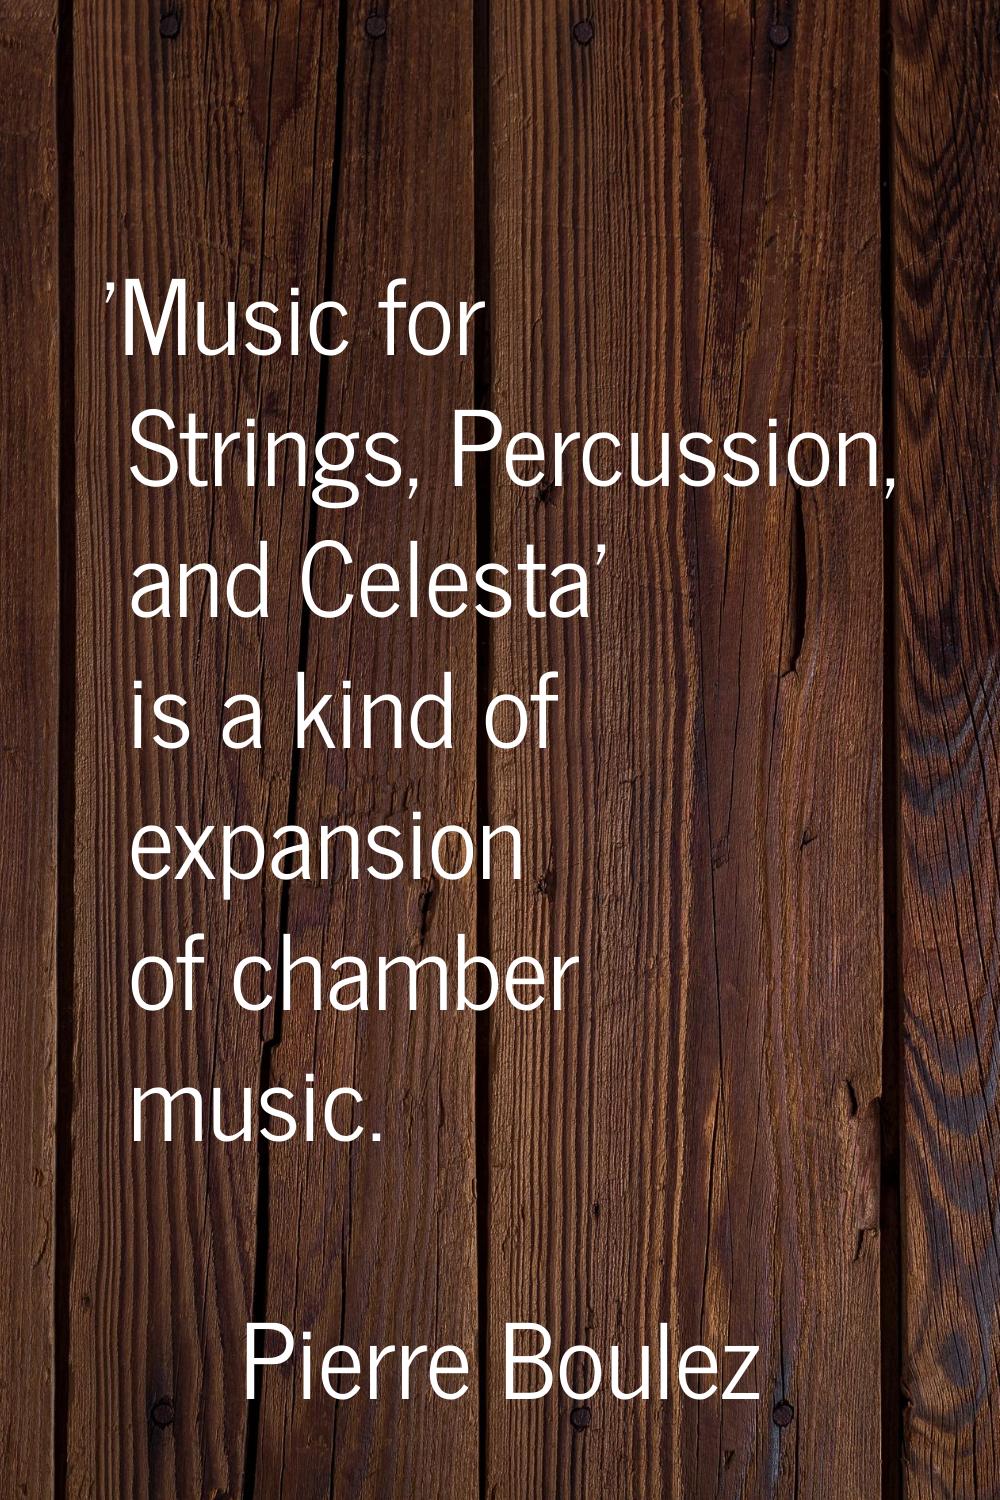 'Music for Strings, Percussion, and Celesta' is a kind of expansion of chamber music.